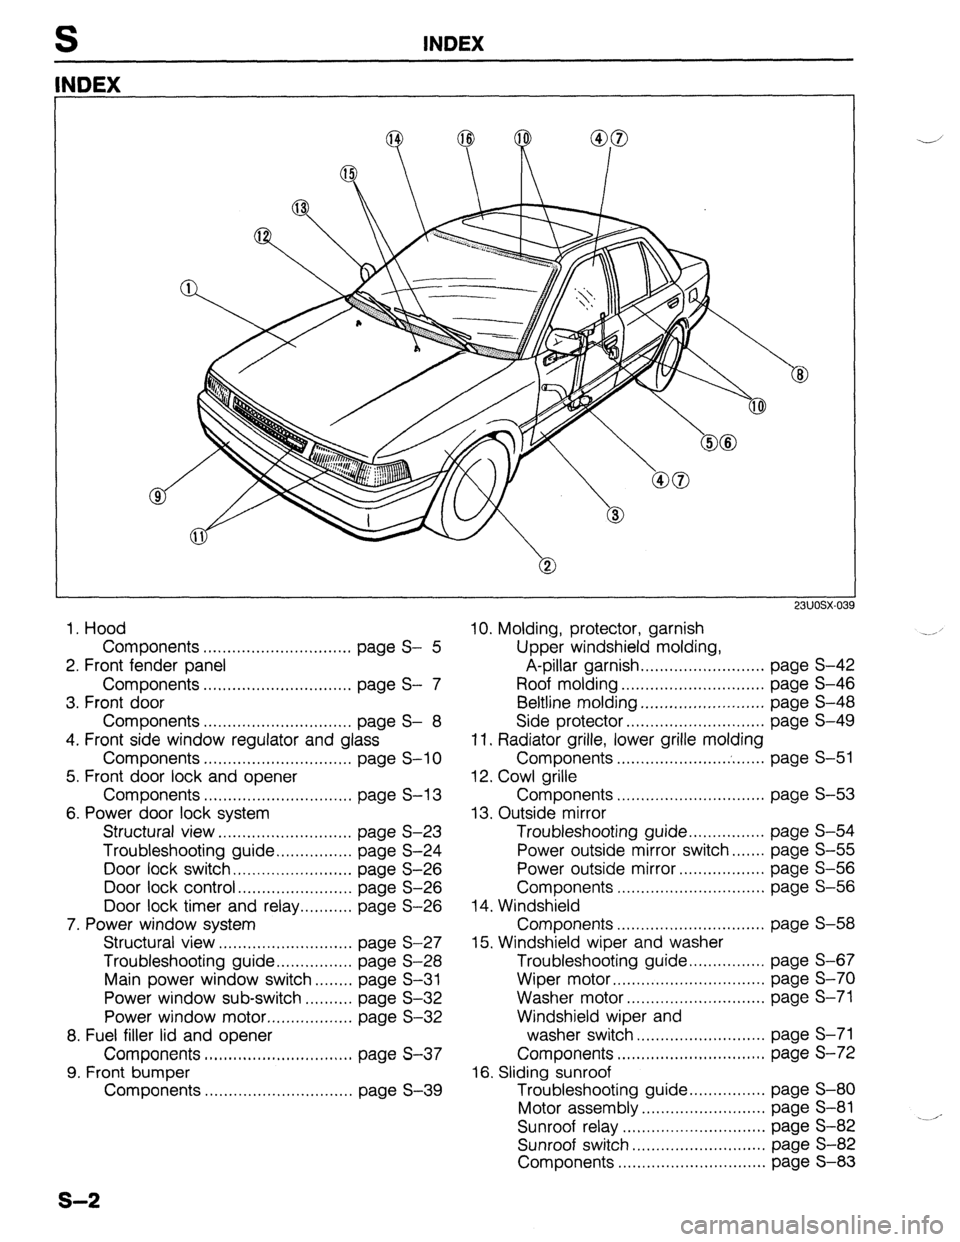 MAZDA PROTEGE 1992  Workshop Manual INDEX 
NDEX 
1. Hood 
Components ............................... page S- 5 
2. Front fender panel 
Components ............................... page S- 7 
3. Front door 
Components .....................